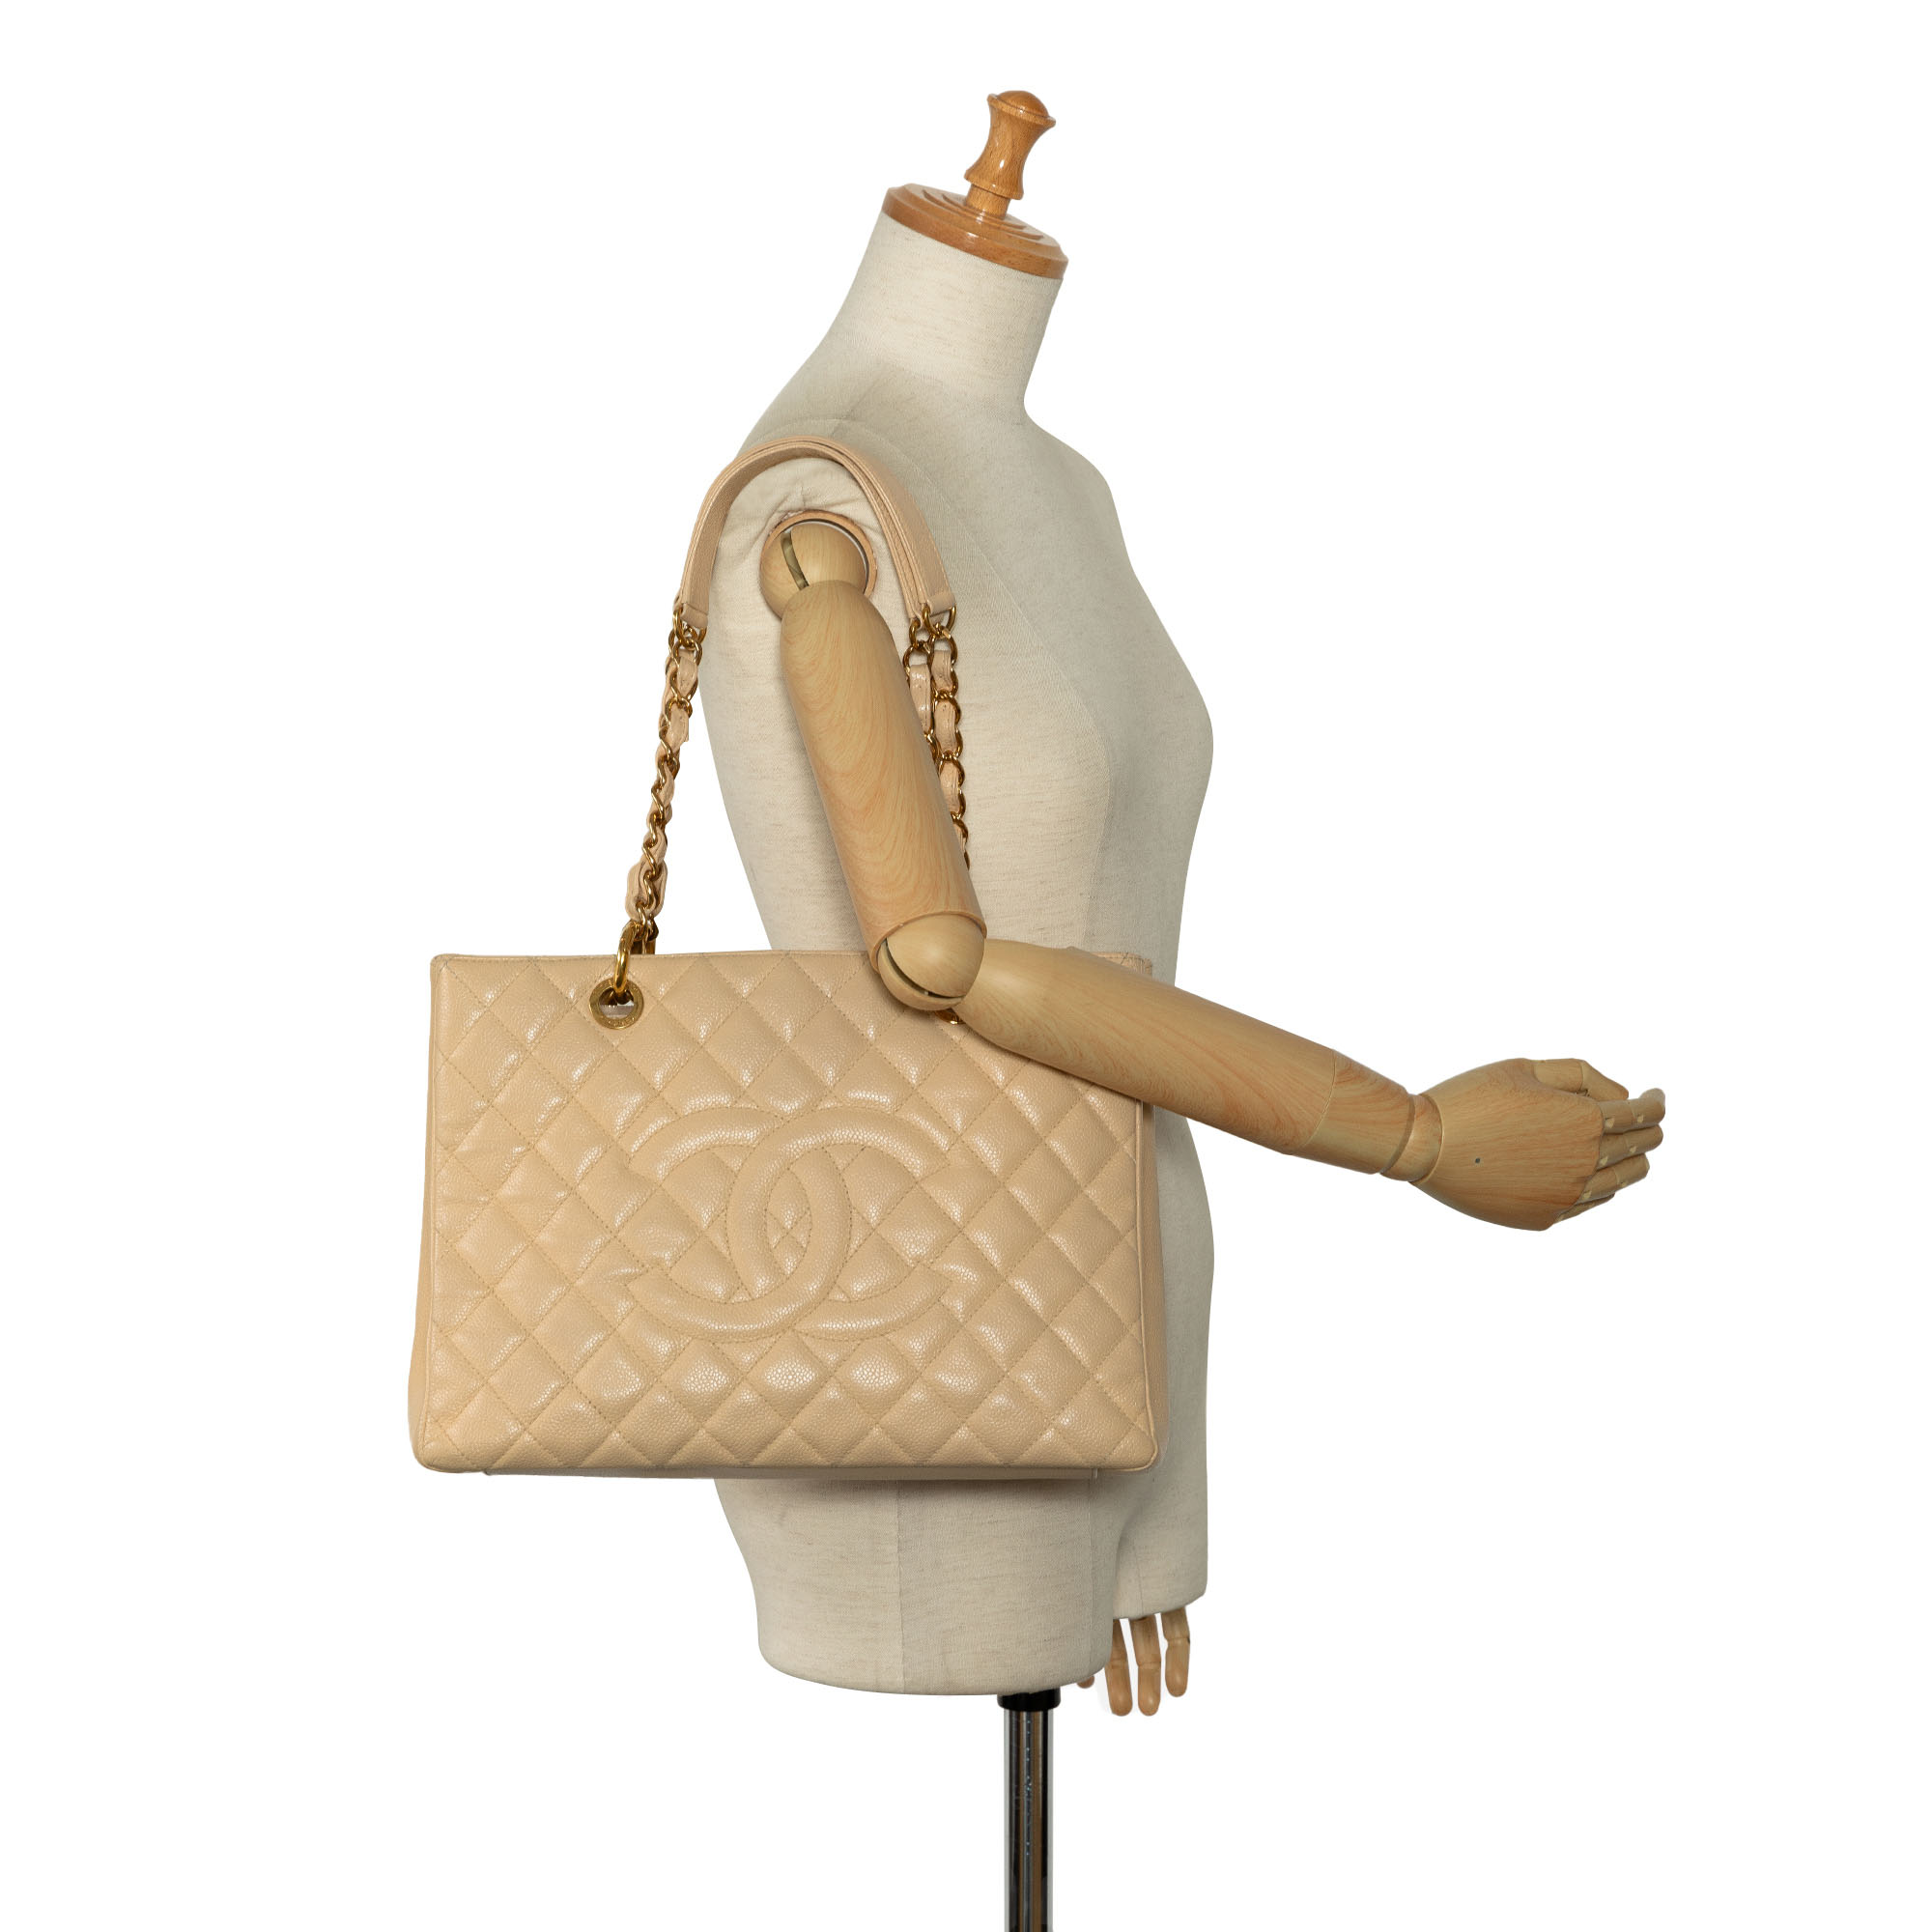 Chanel Caviar Grand Shopping Tote - Image 15 of 16